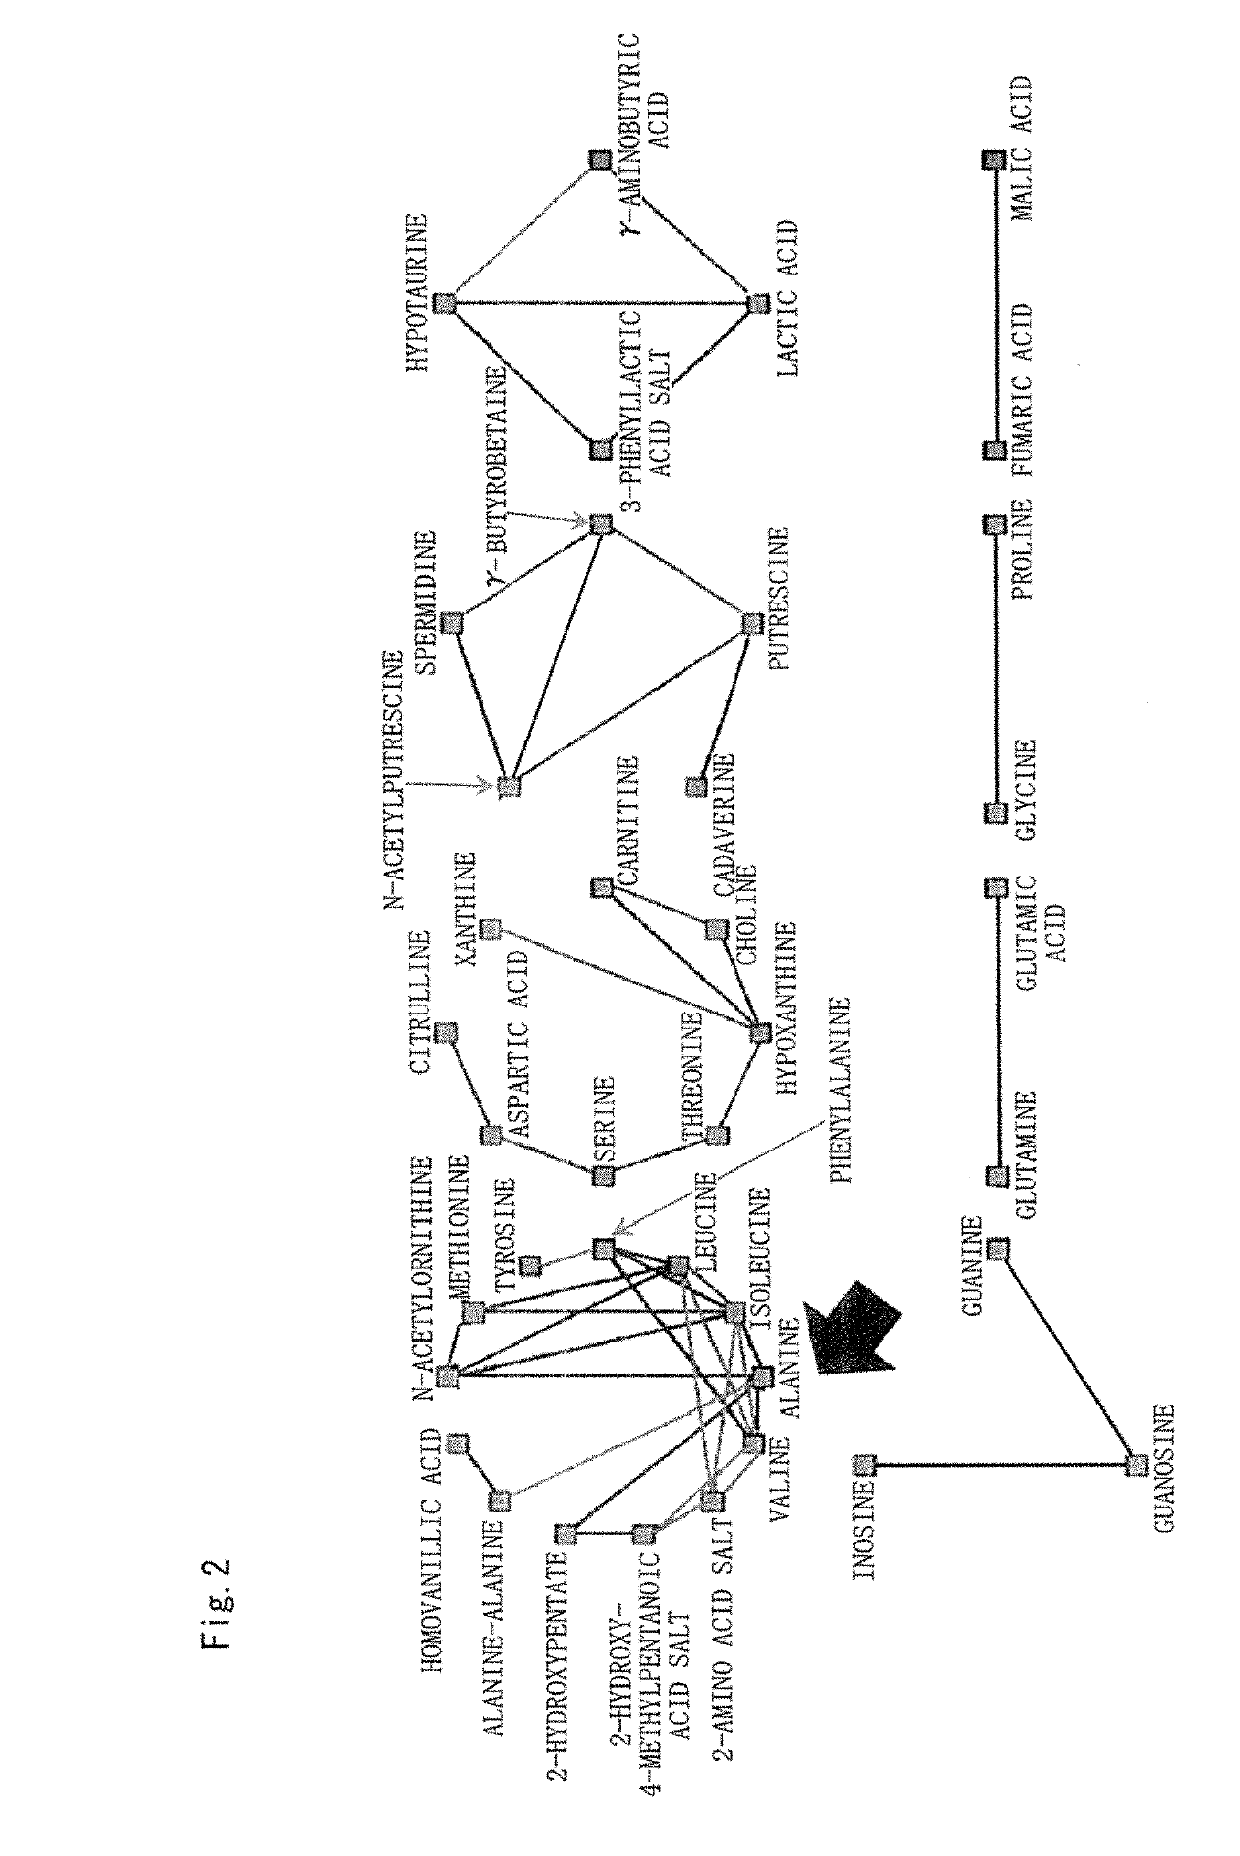 Salivary biomarkers for cancers, methods and devices for assaying the same, and methods for determining salivary biomarkers for cancers